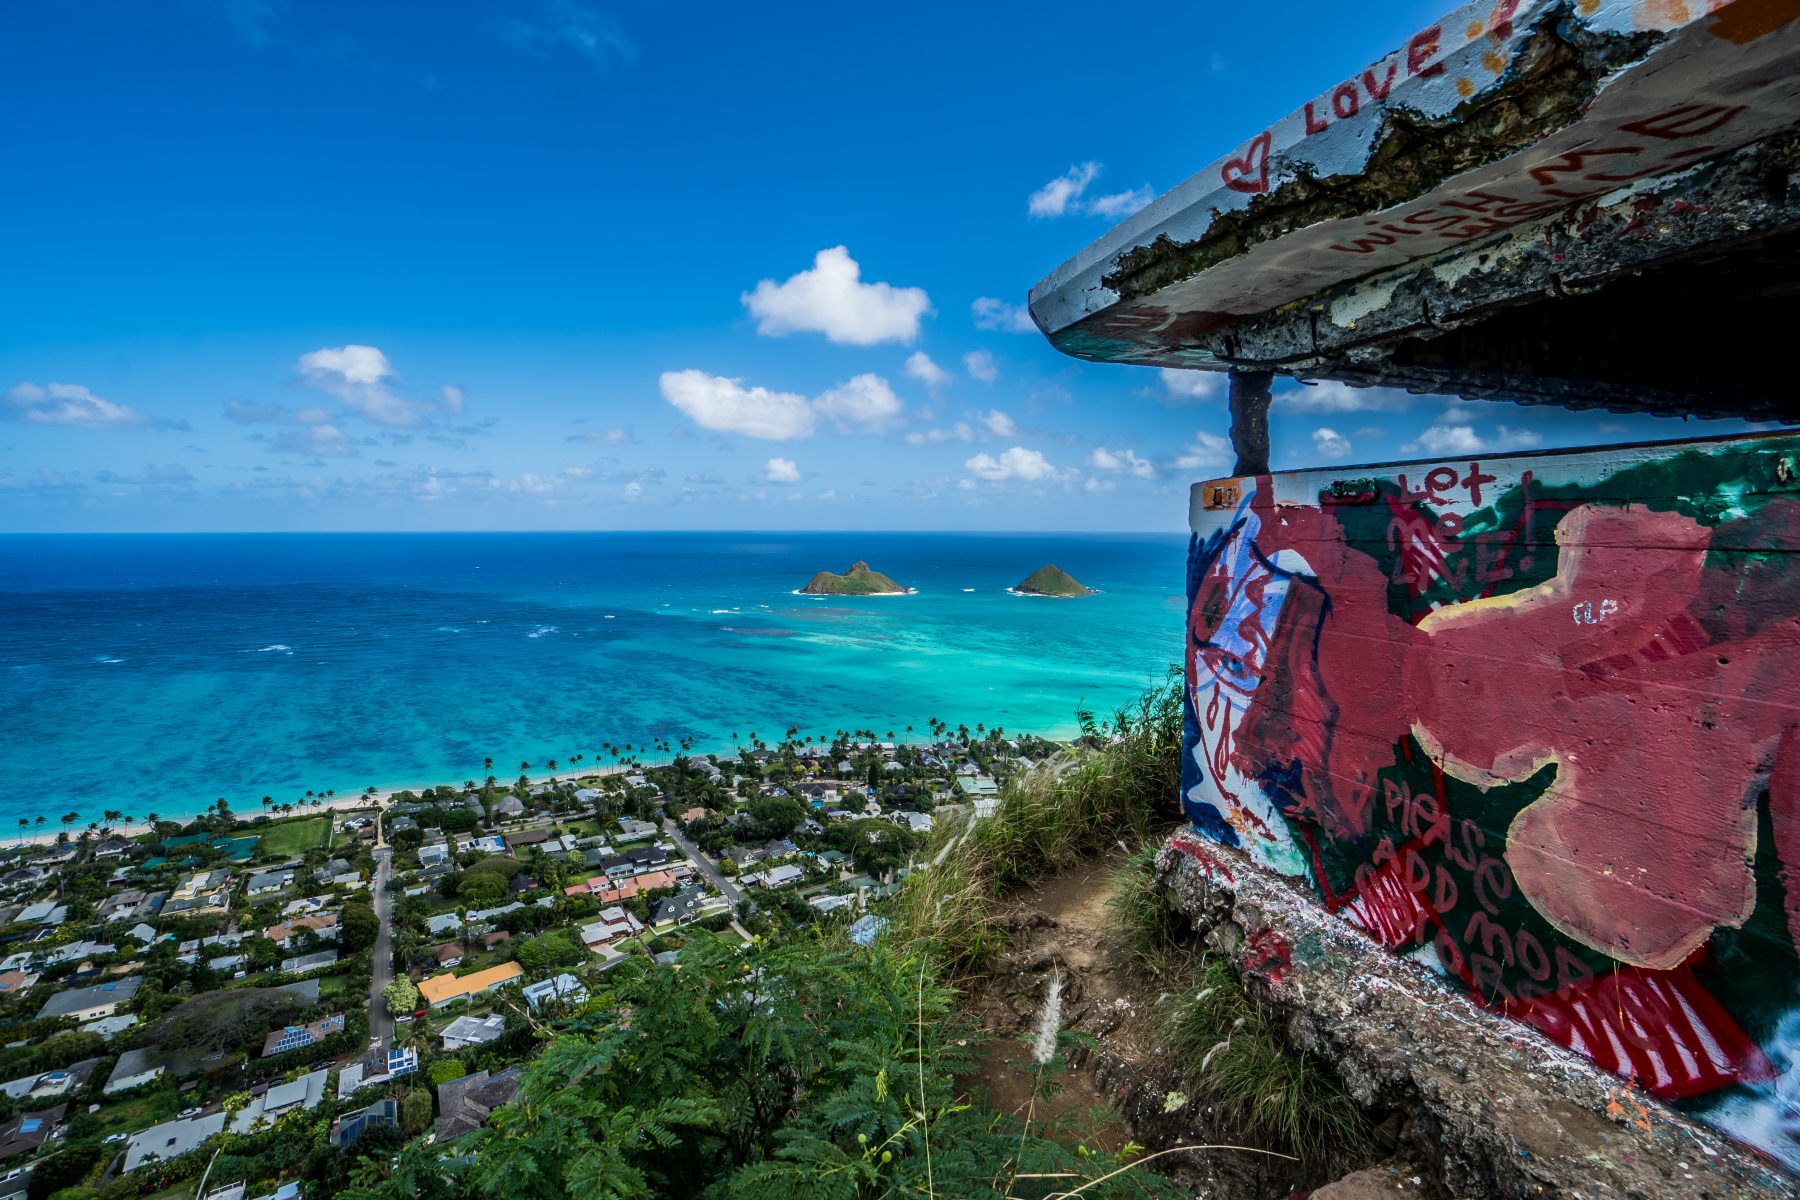 This is the view from the first pillbox.